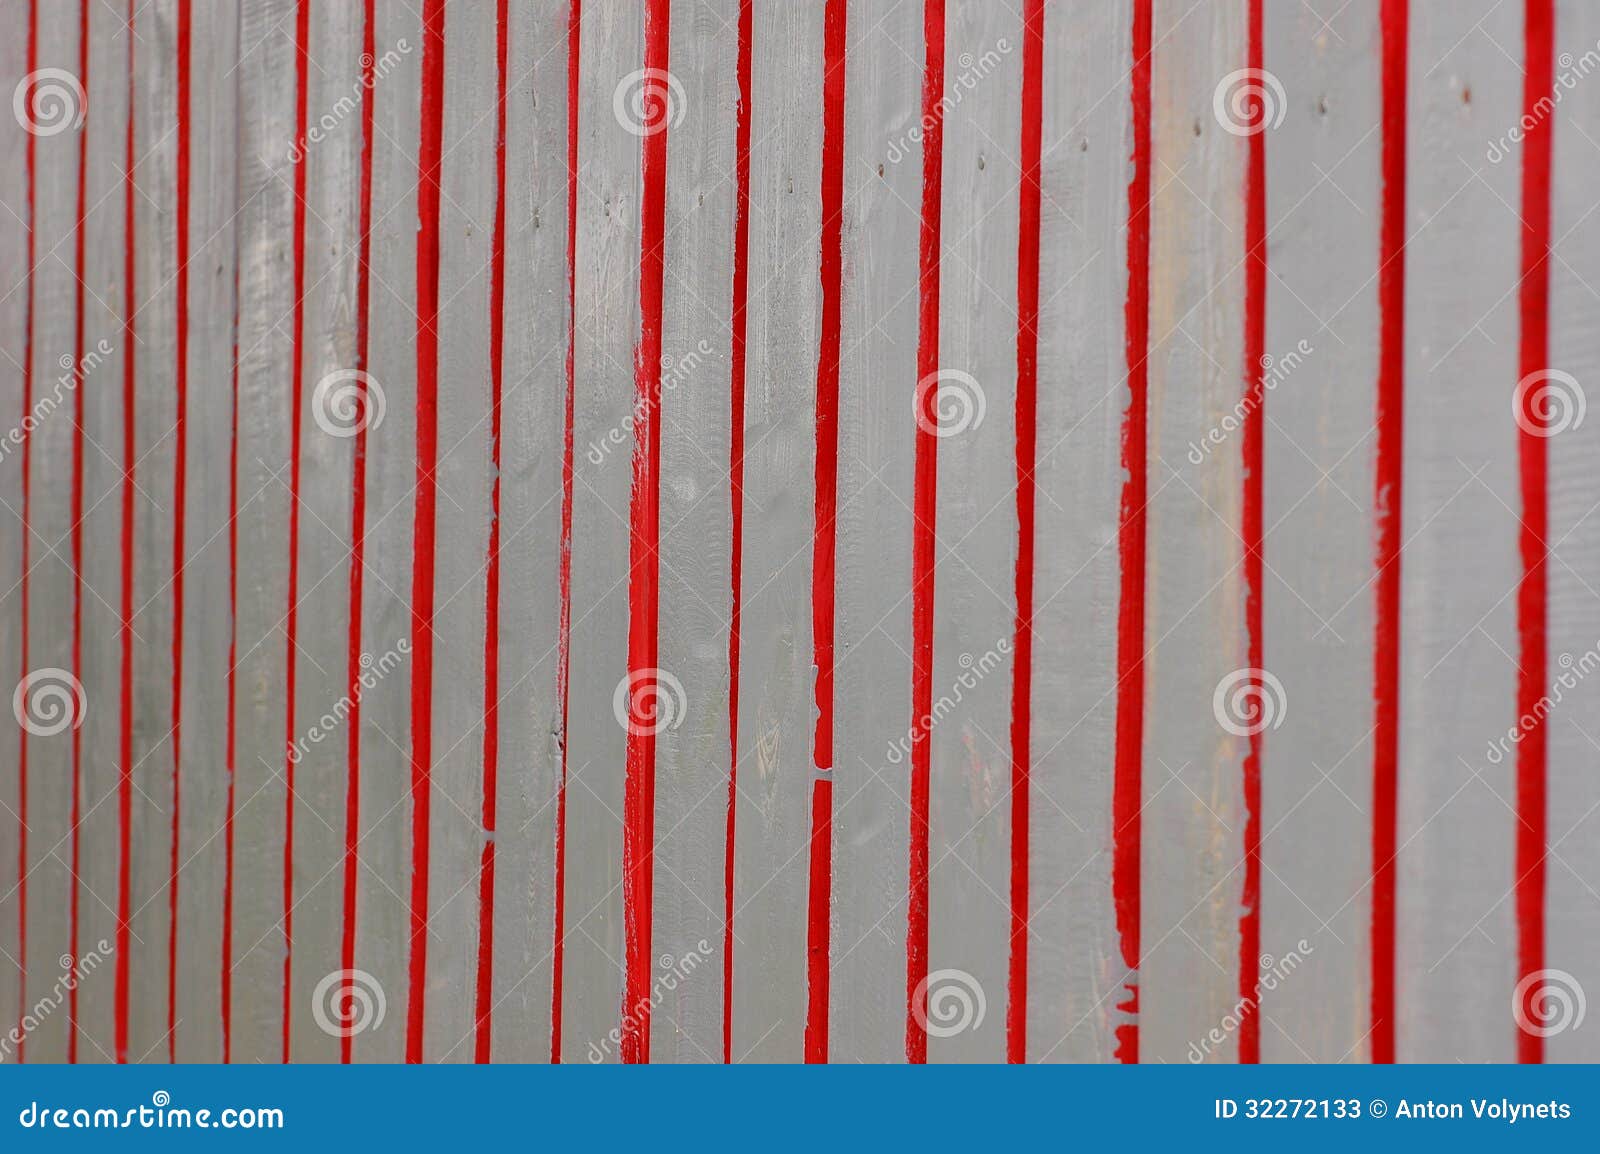 Wooden fence painted in red and gray colors.